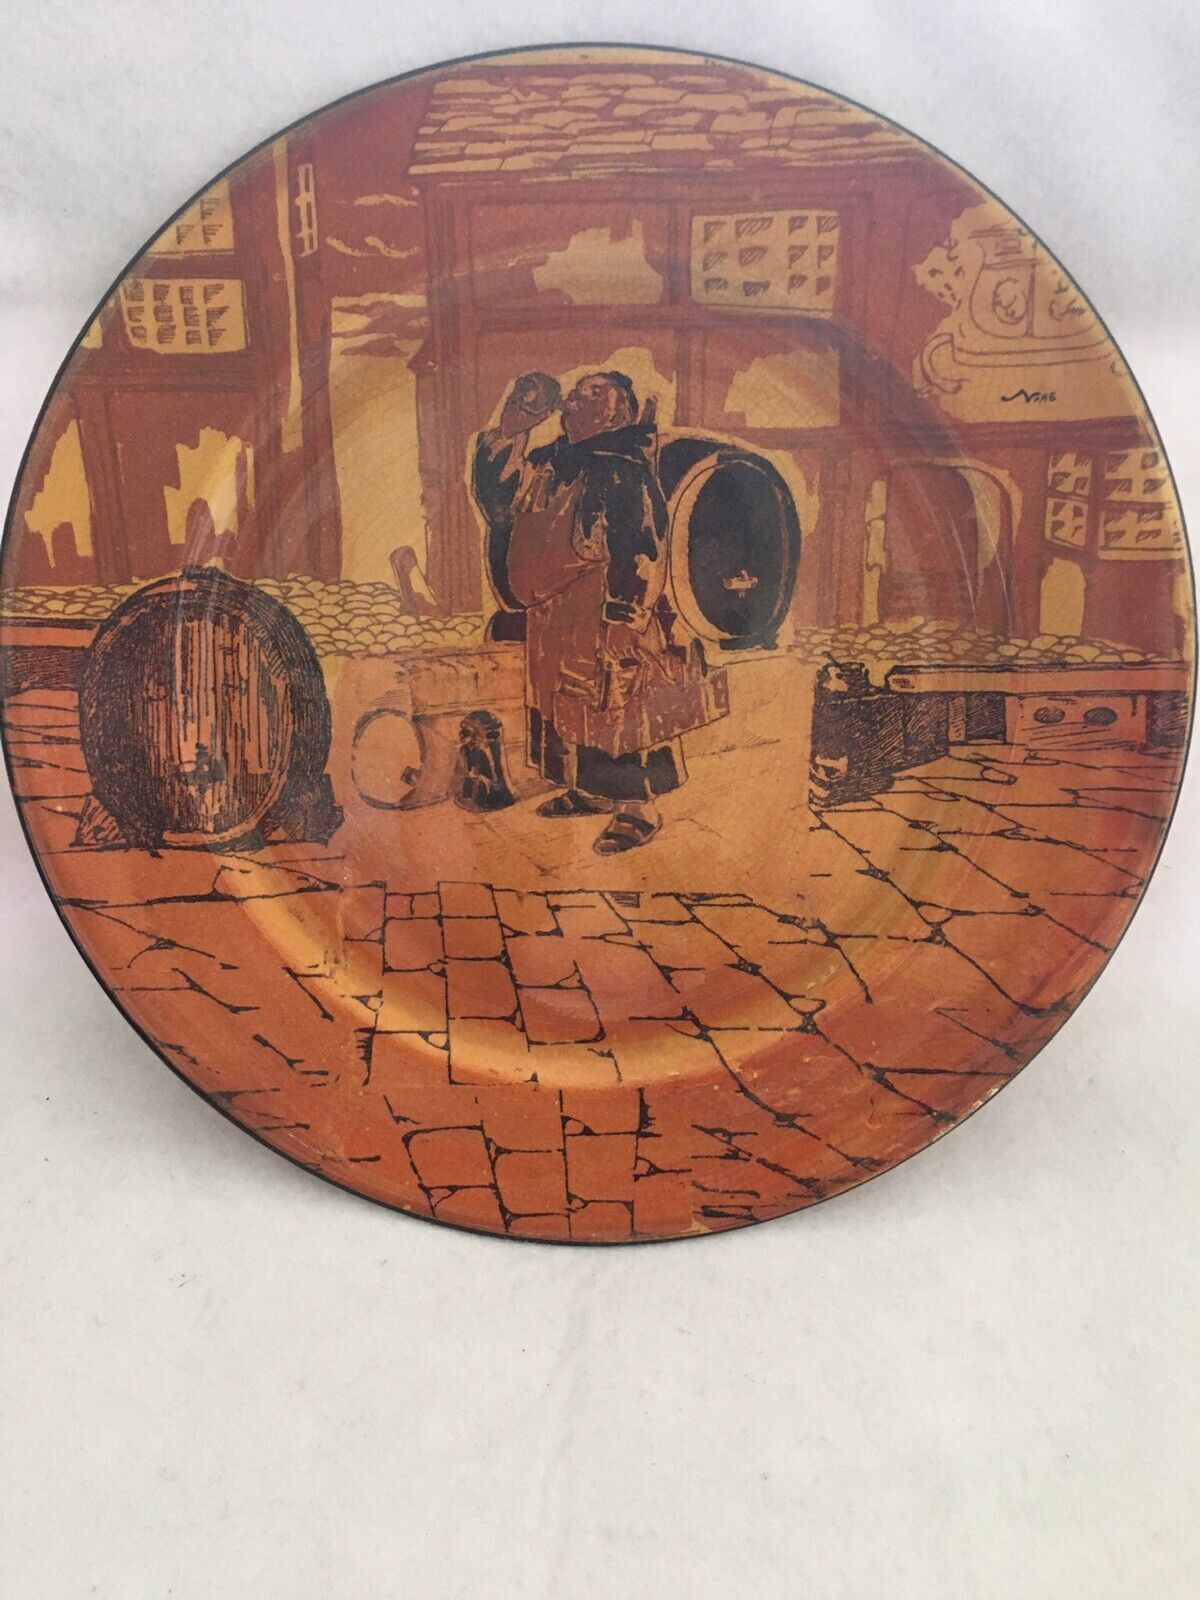 **SALE** Royal Doulton Drinking Friar, Nome Italy Collector Plate, Numbered